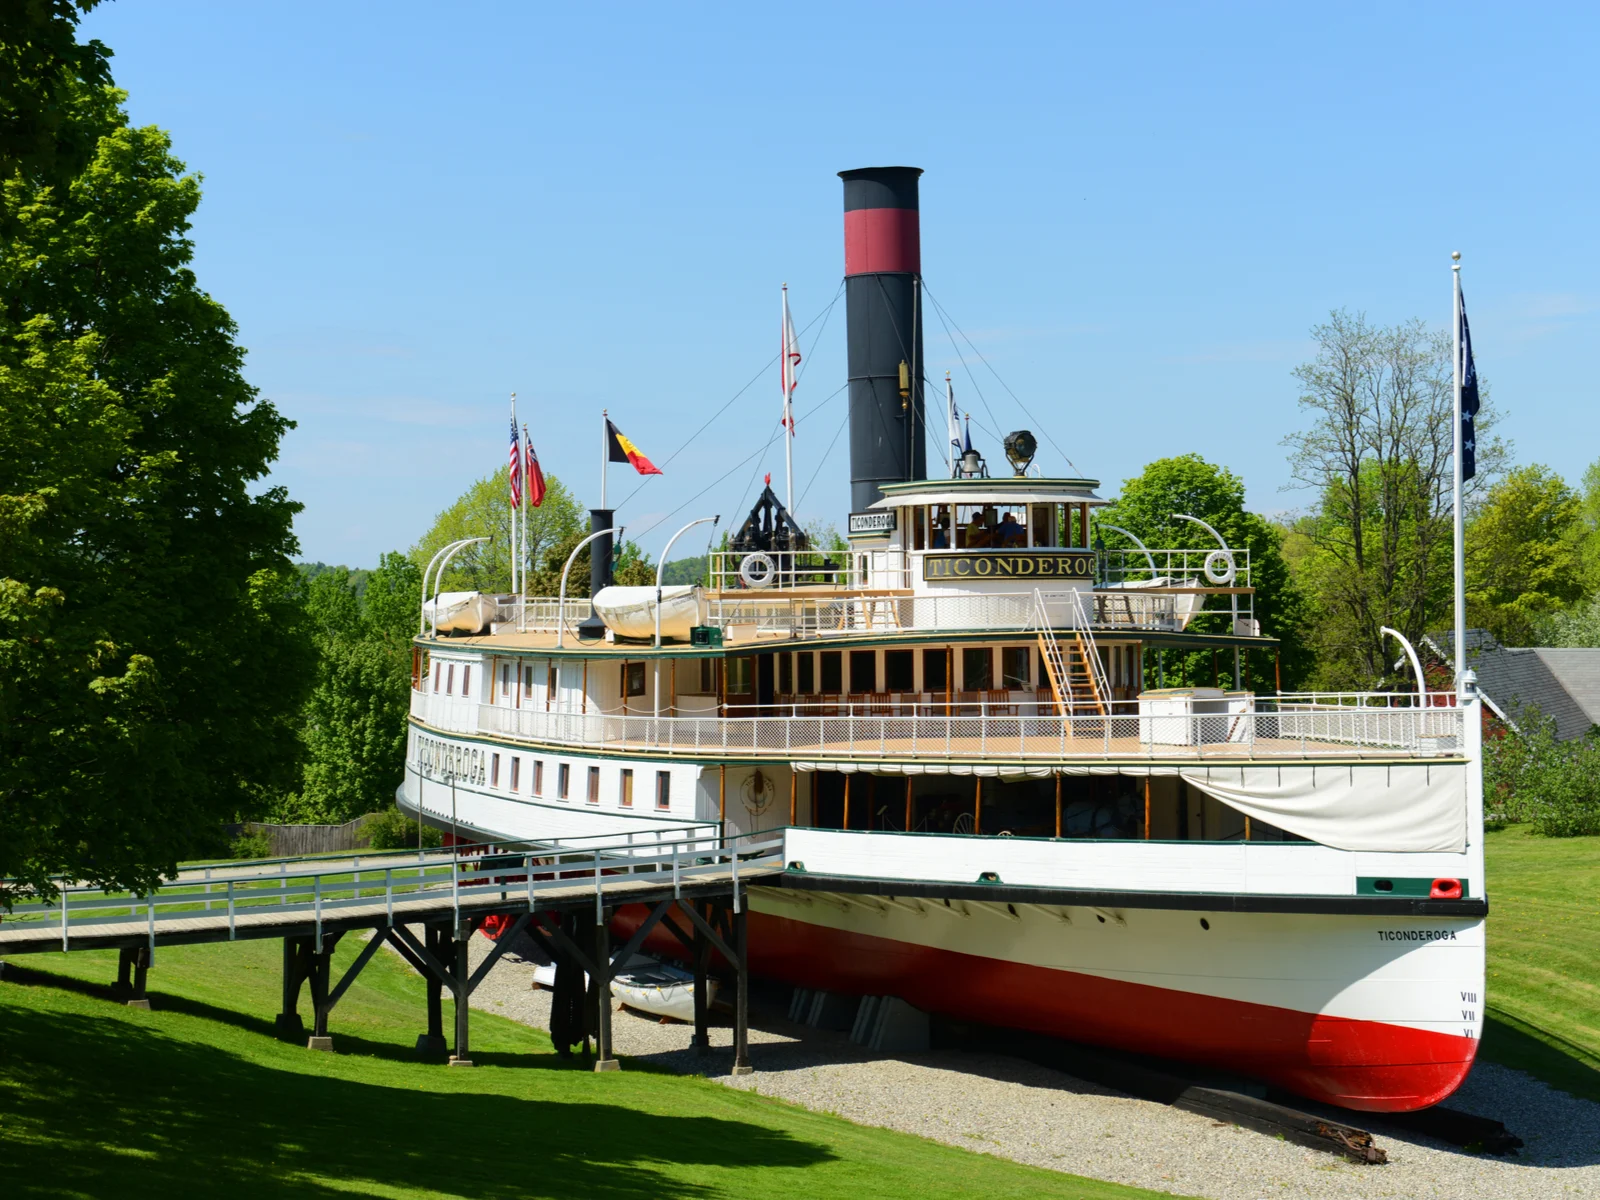 Old ferry boat at one of the best places to visit in Vermont, the Shelburne Museum, pictured on a sunny day